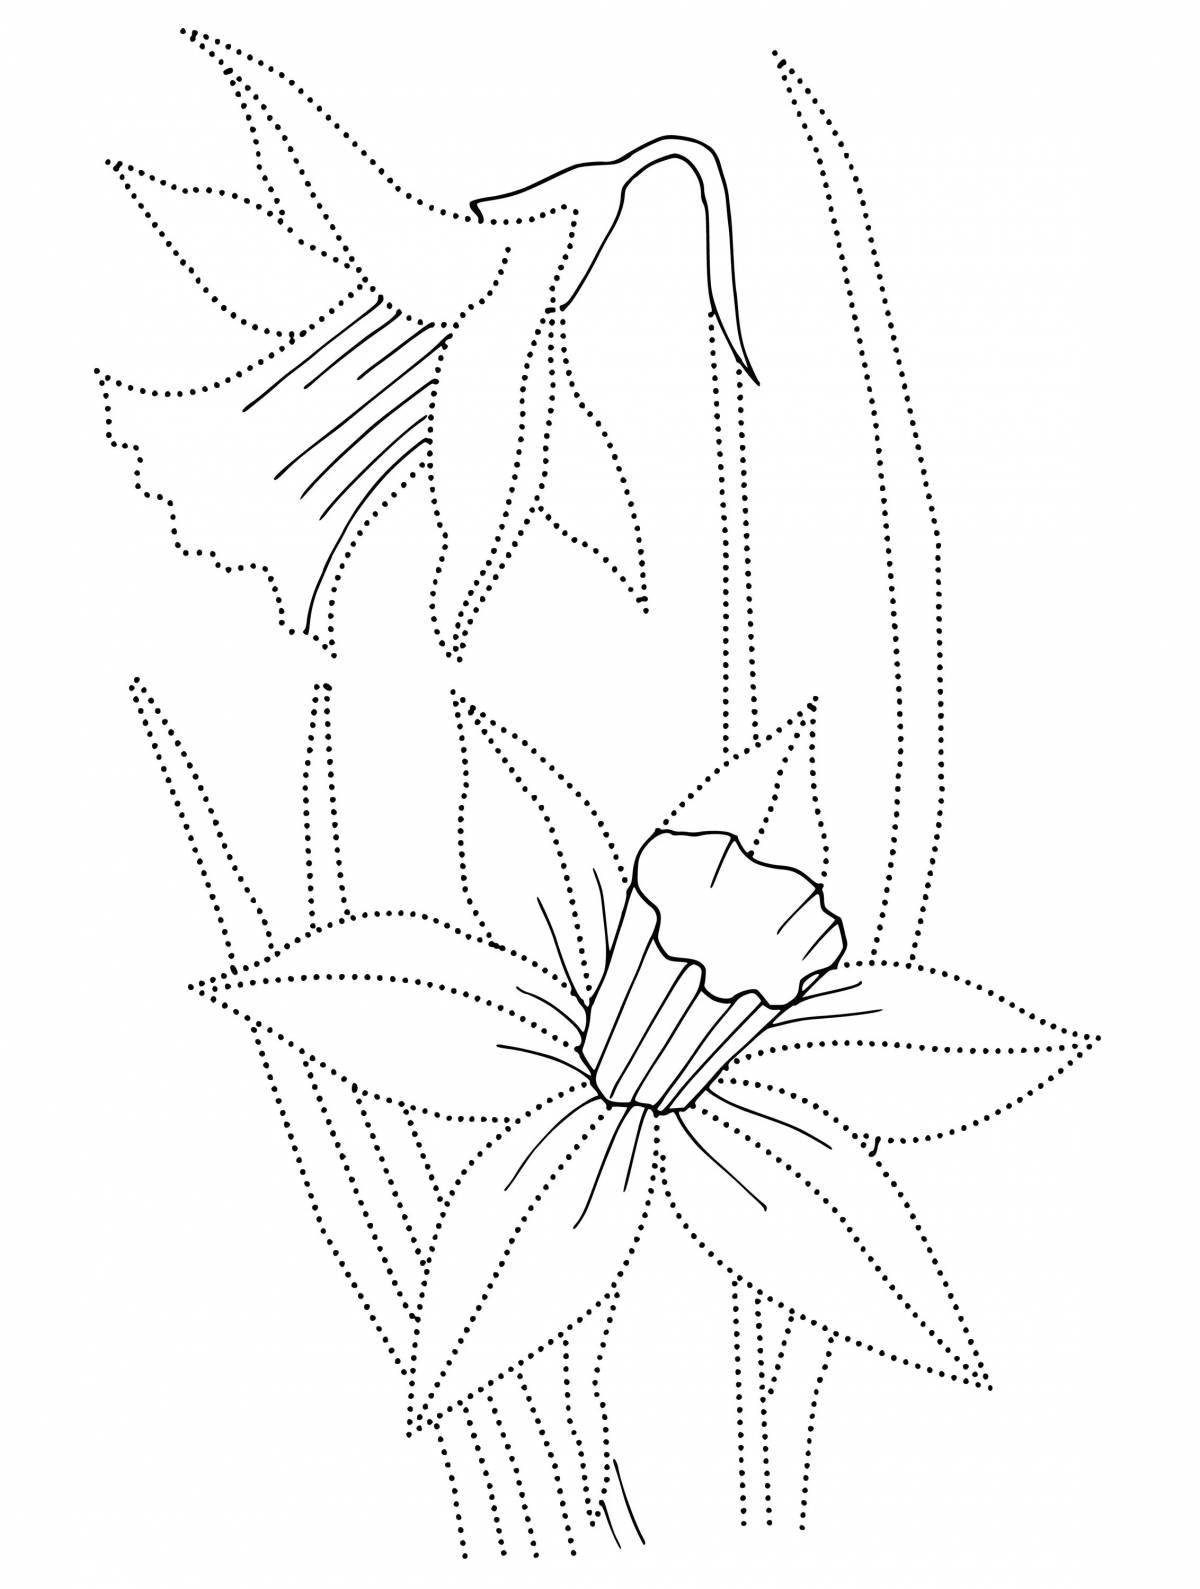 Coloring book of a fascinating narcissus flower